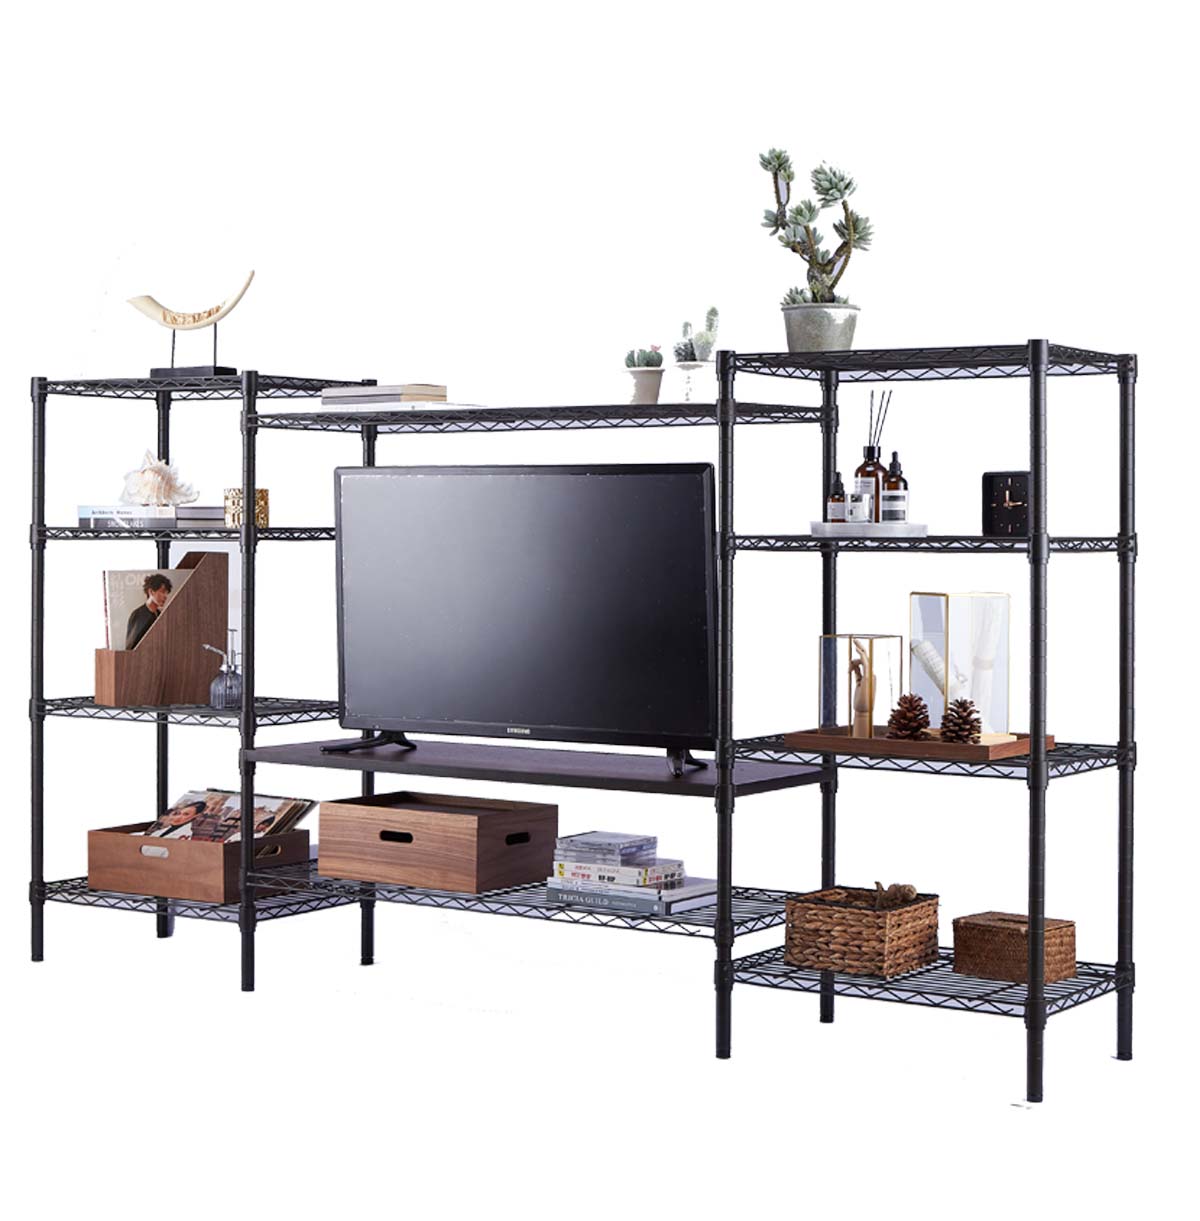 11-Tier Metal TV Stand for 42 inch TV / Entertainment Center / TV Console Table With Open Storage Sh